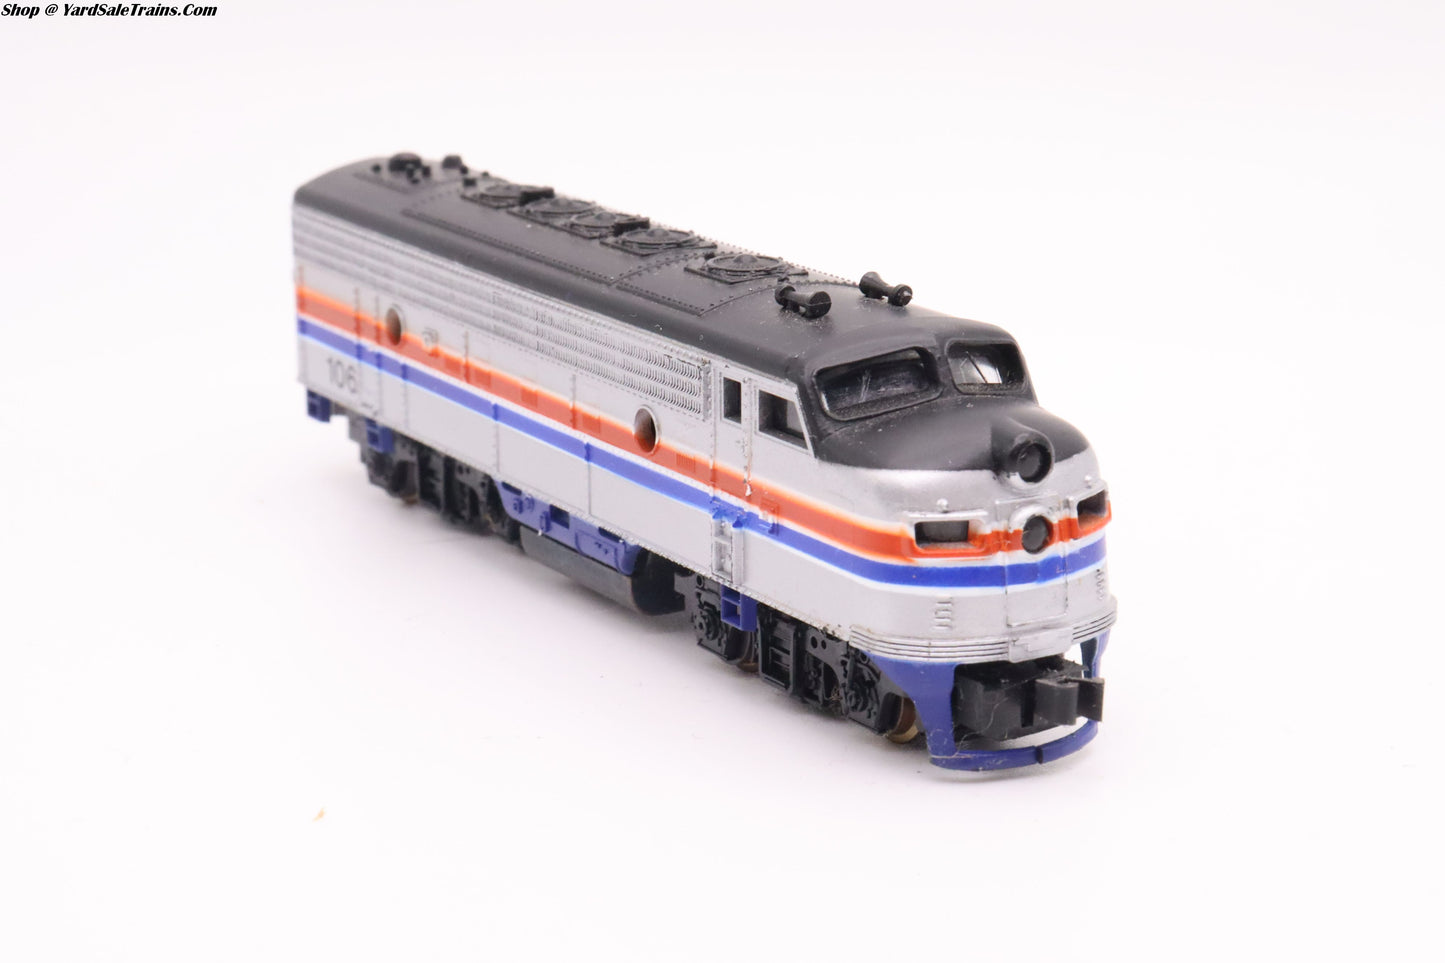 LL-7739 - F-7 Locomotive - AMTRACK - #106 - N Scale - Preowned